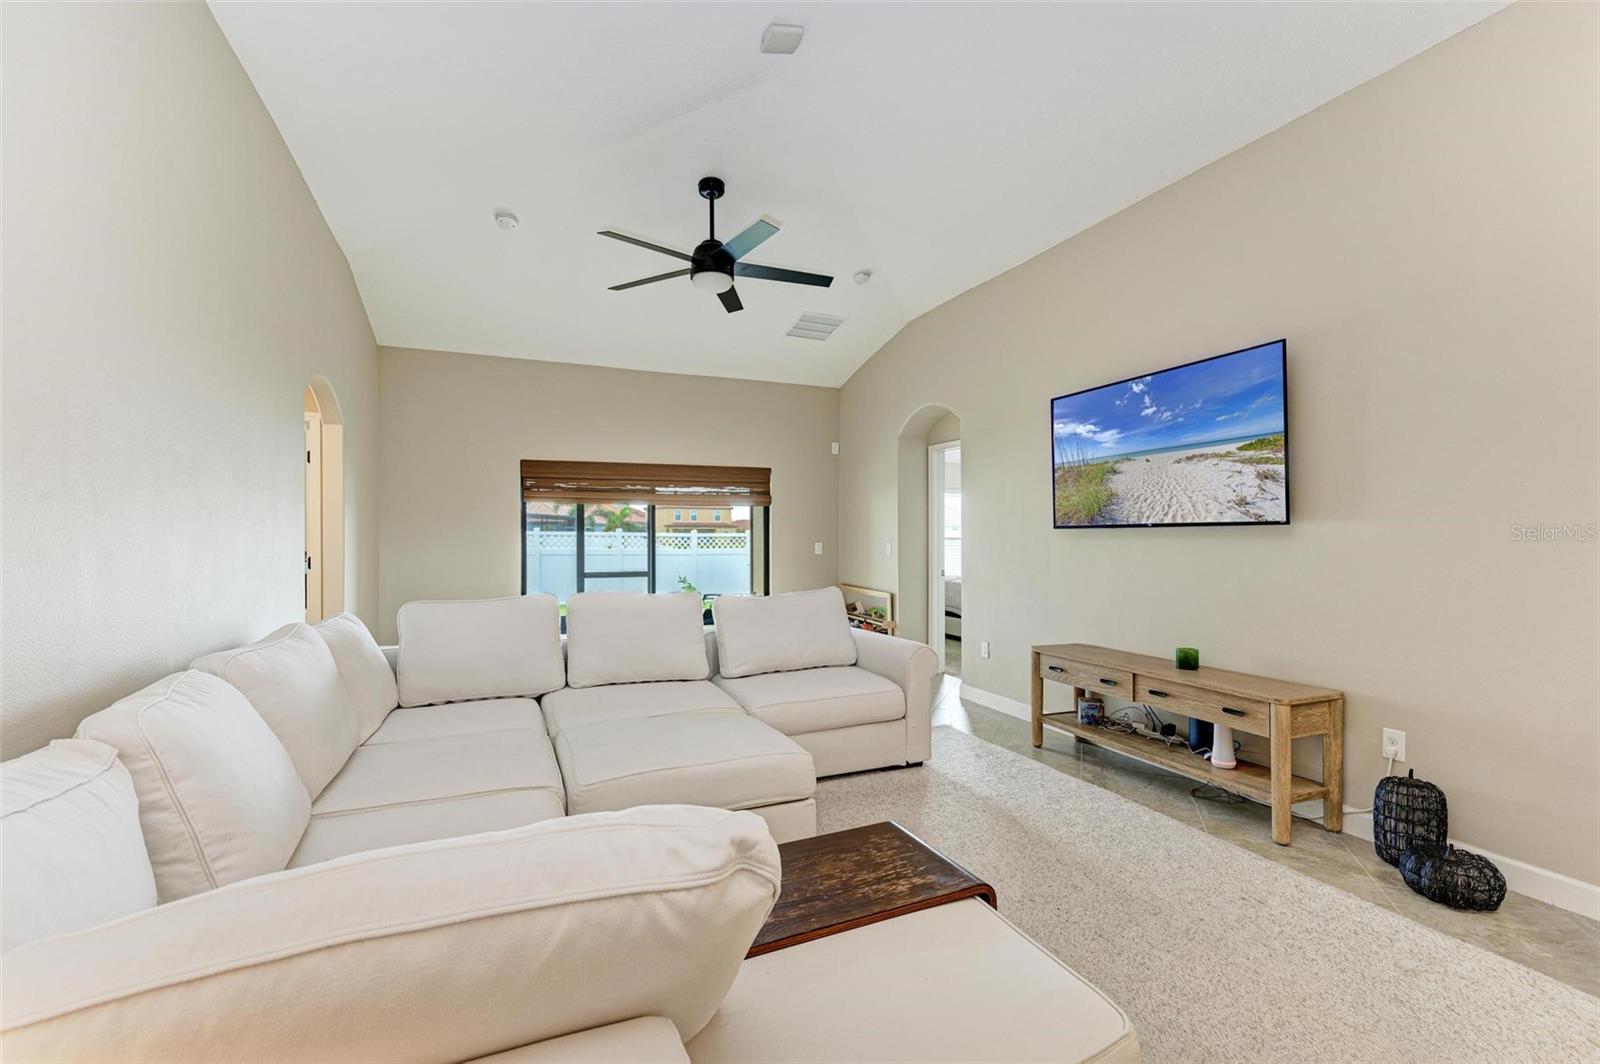 Family room with plenty of room to have the whole family enjoying time together!  Modern ceiling fan and blinds to accentuate the room.